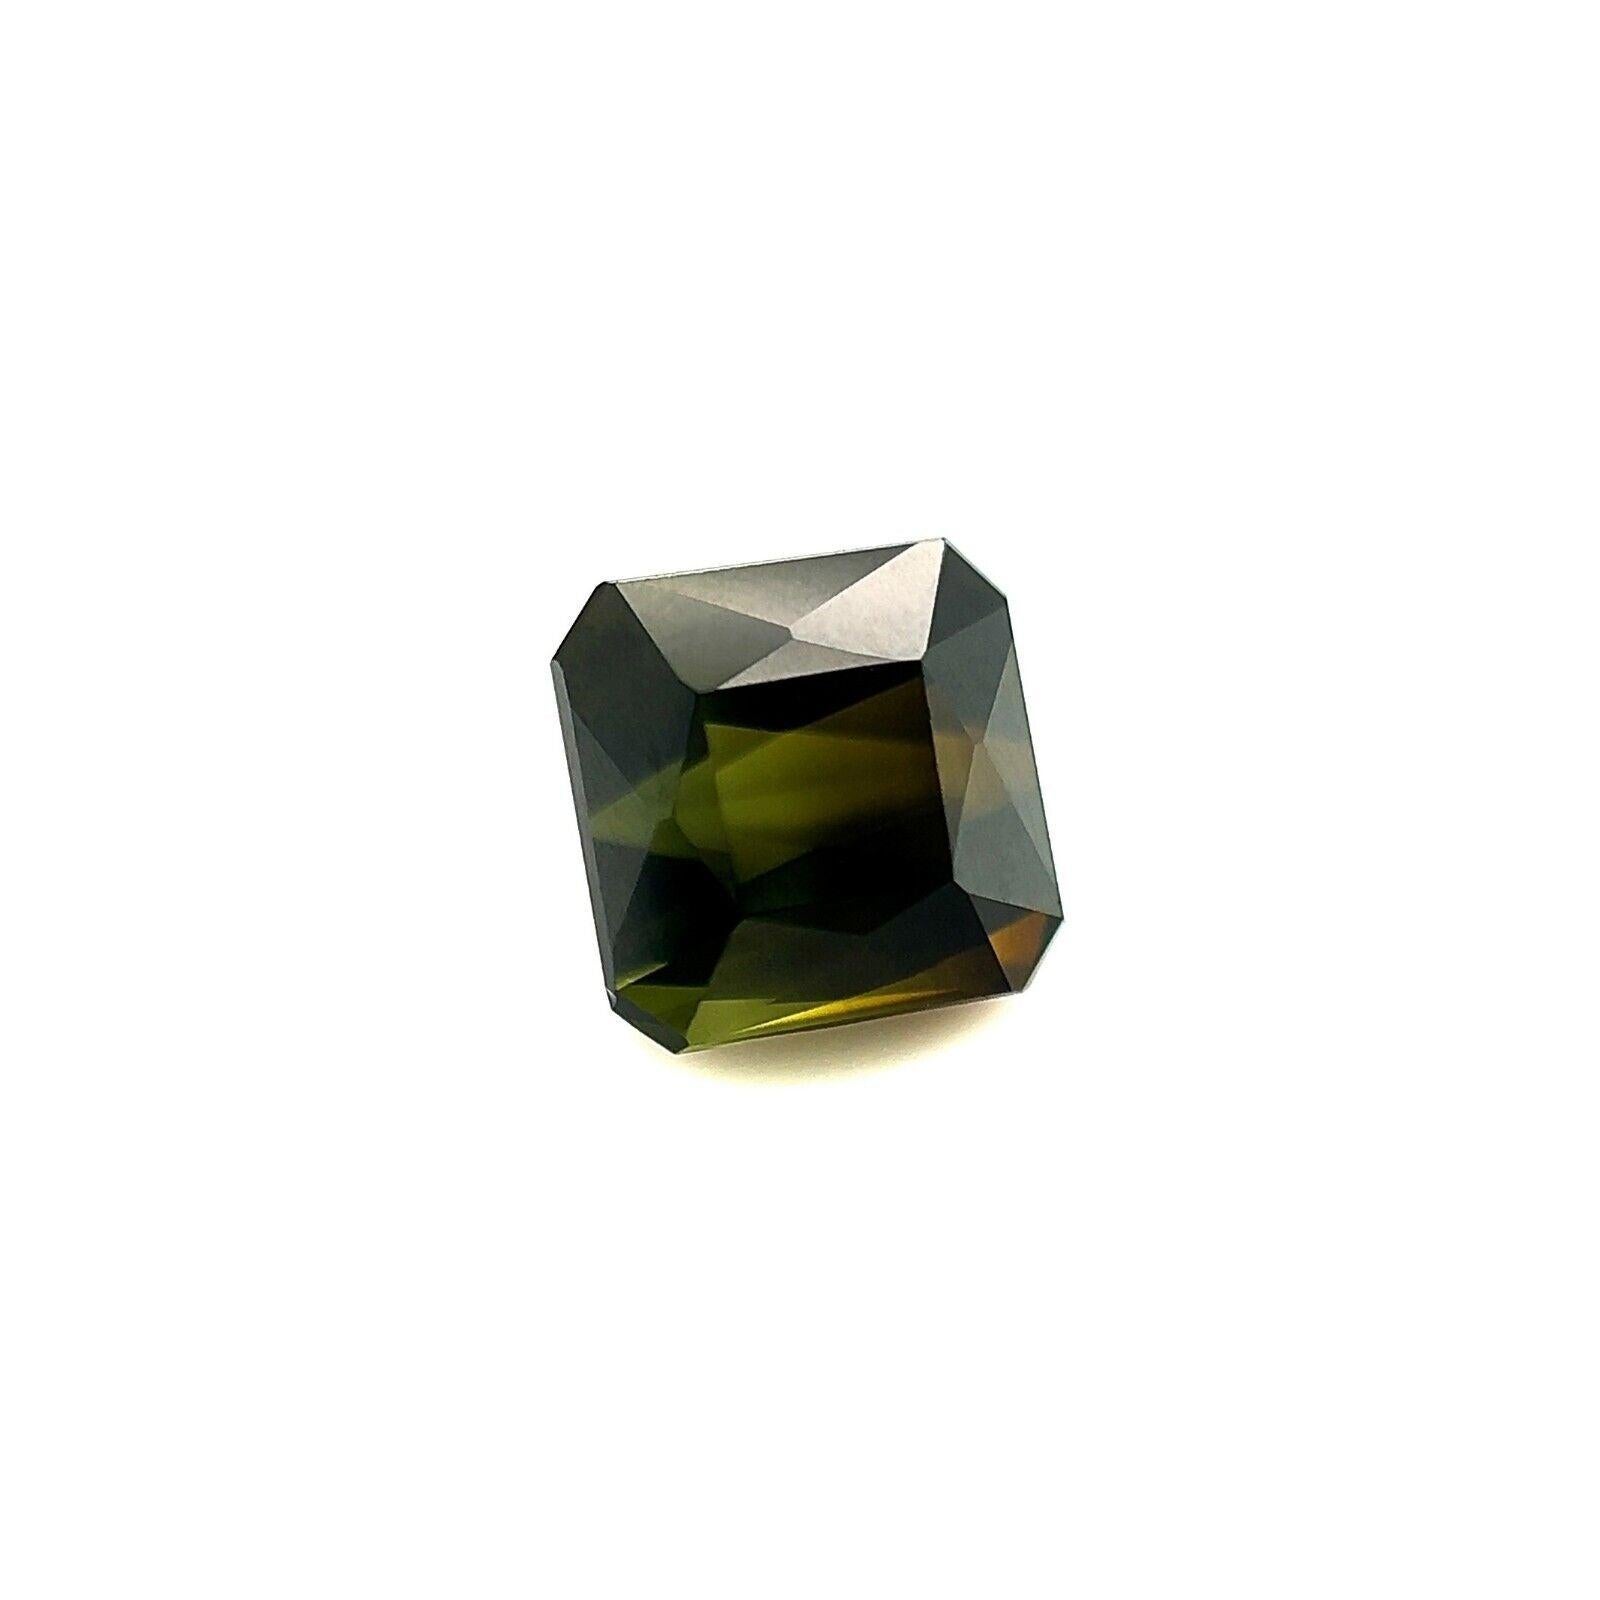 Fine 1.84ct Olive Green Tourmaline Fancy Scissor Emerald Octagon Cut 6.6x6mm VS

Natural Olive Green Tourmaline Gemstone.
1.84 Carat with a beautiful and deep green colour and good clarity, a clean stone.
Also has a good fancy scissor